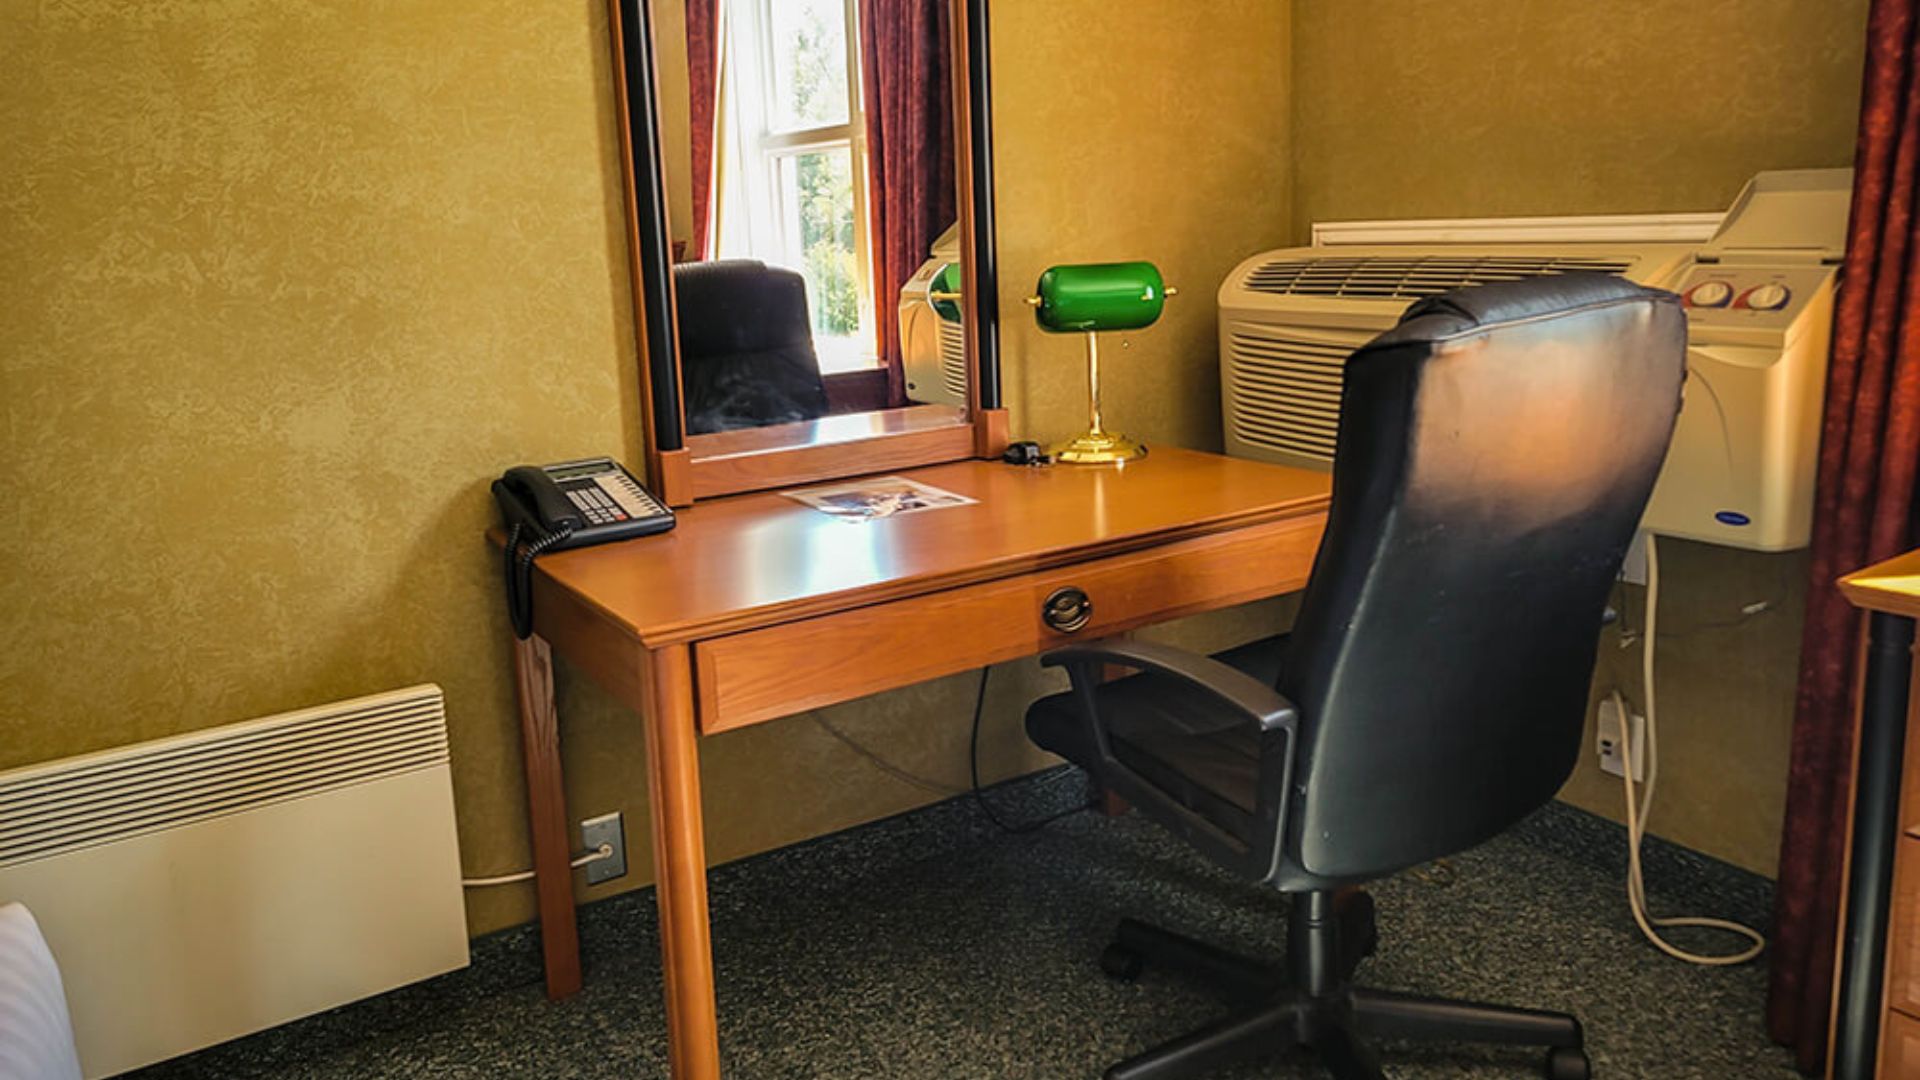 Cedar Meadows Spa & Resort A resort hotel room in Timmins, Ontario with a desk, chair, and air conditioner. - Timmins, Ontario